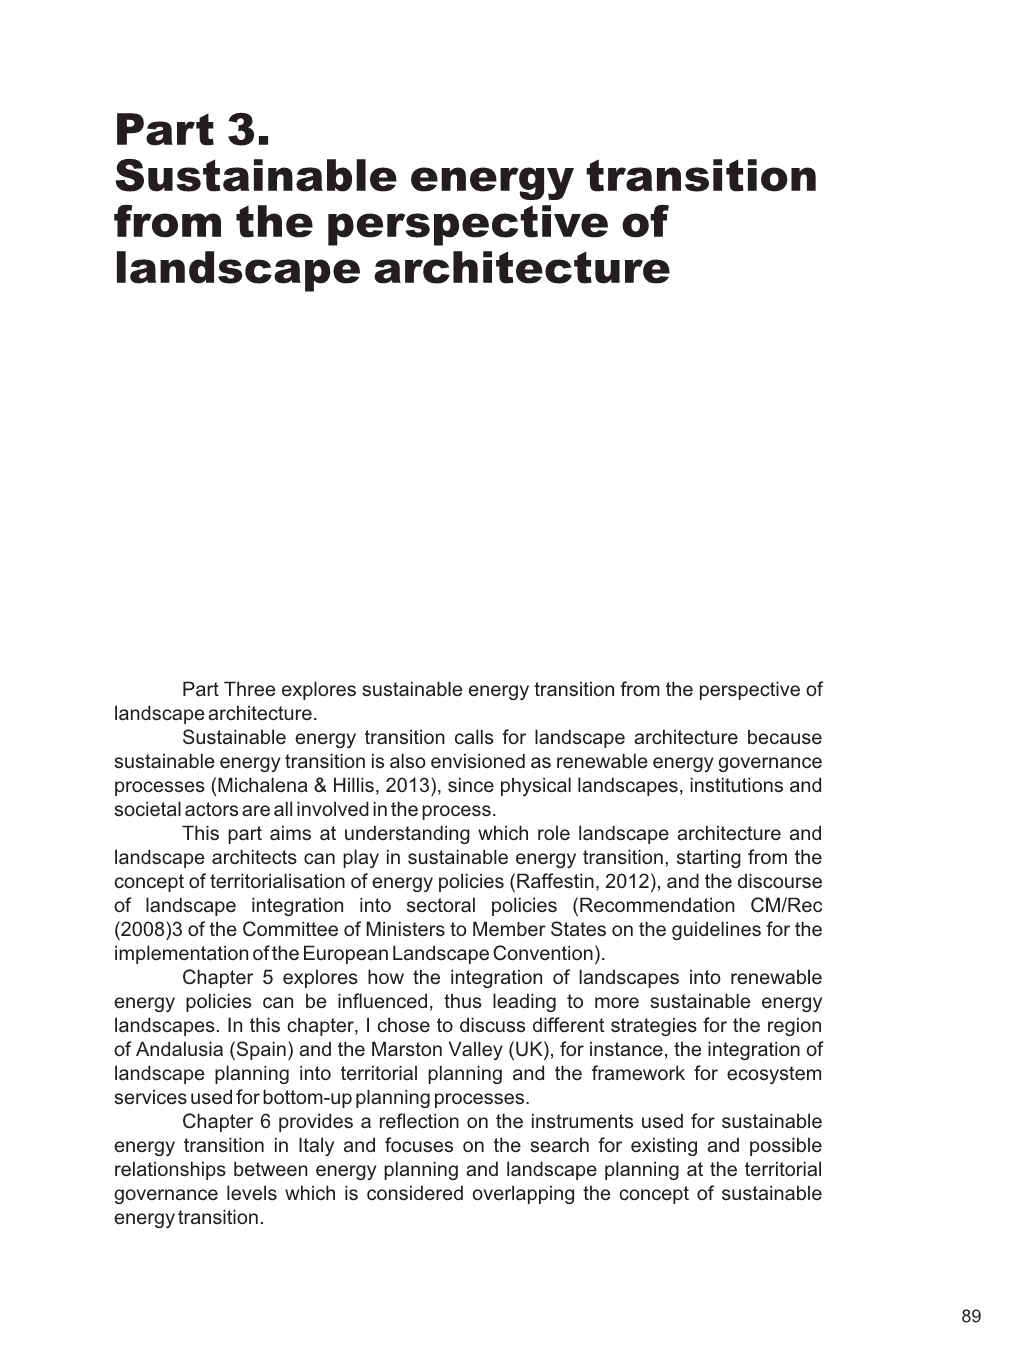 Part 3. Sustainable Energy Transition from the Perspective of Landscape Architecture